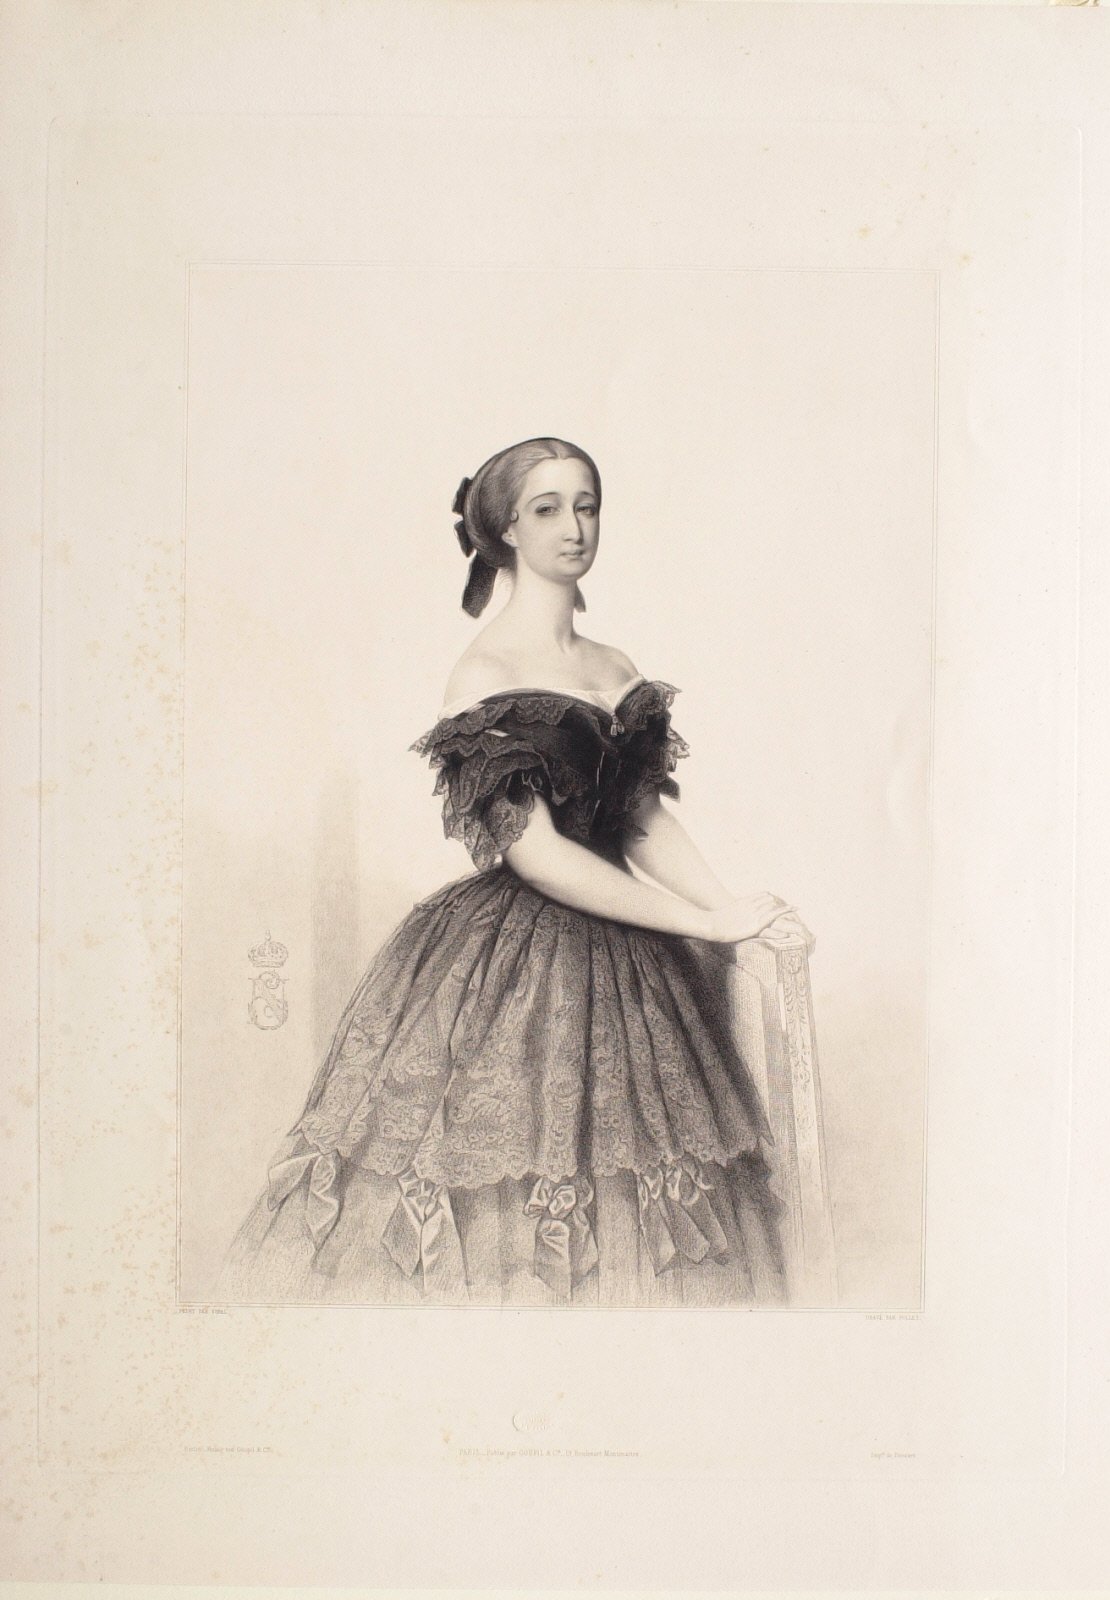 Empress Eugenie - The Art of the Photogravure